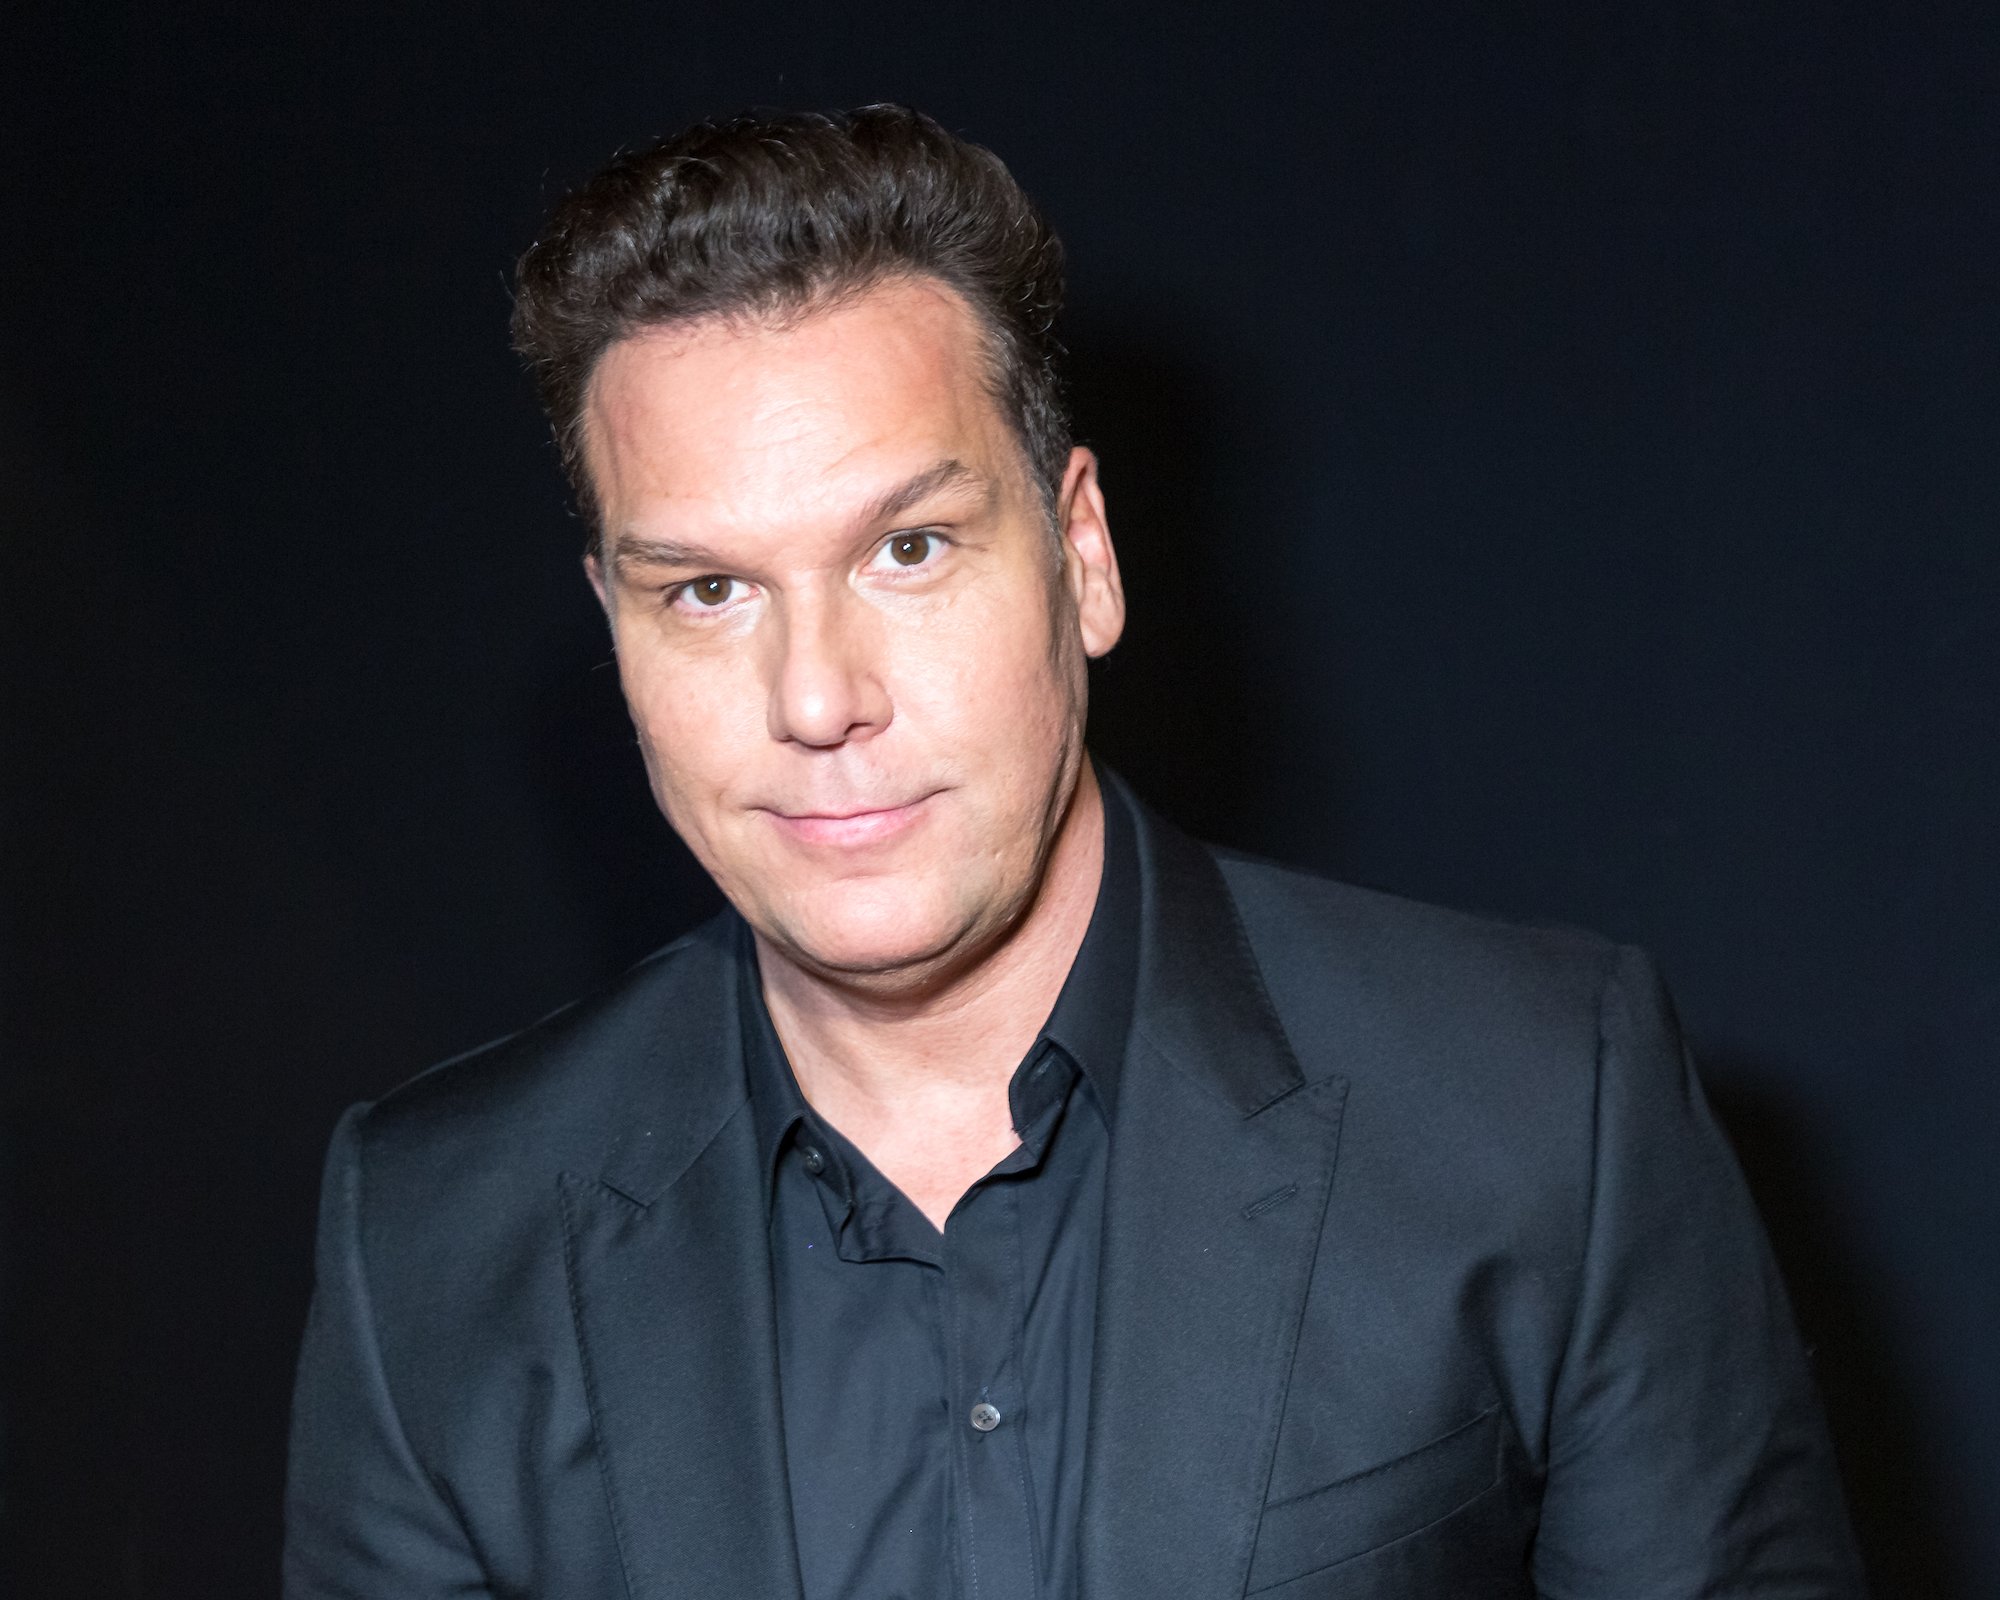 What happened to comedian Dane Cook? Pictured here is Cook smiling in front of a black background